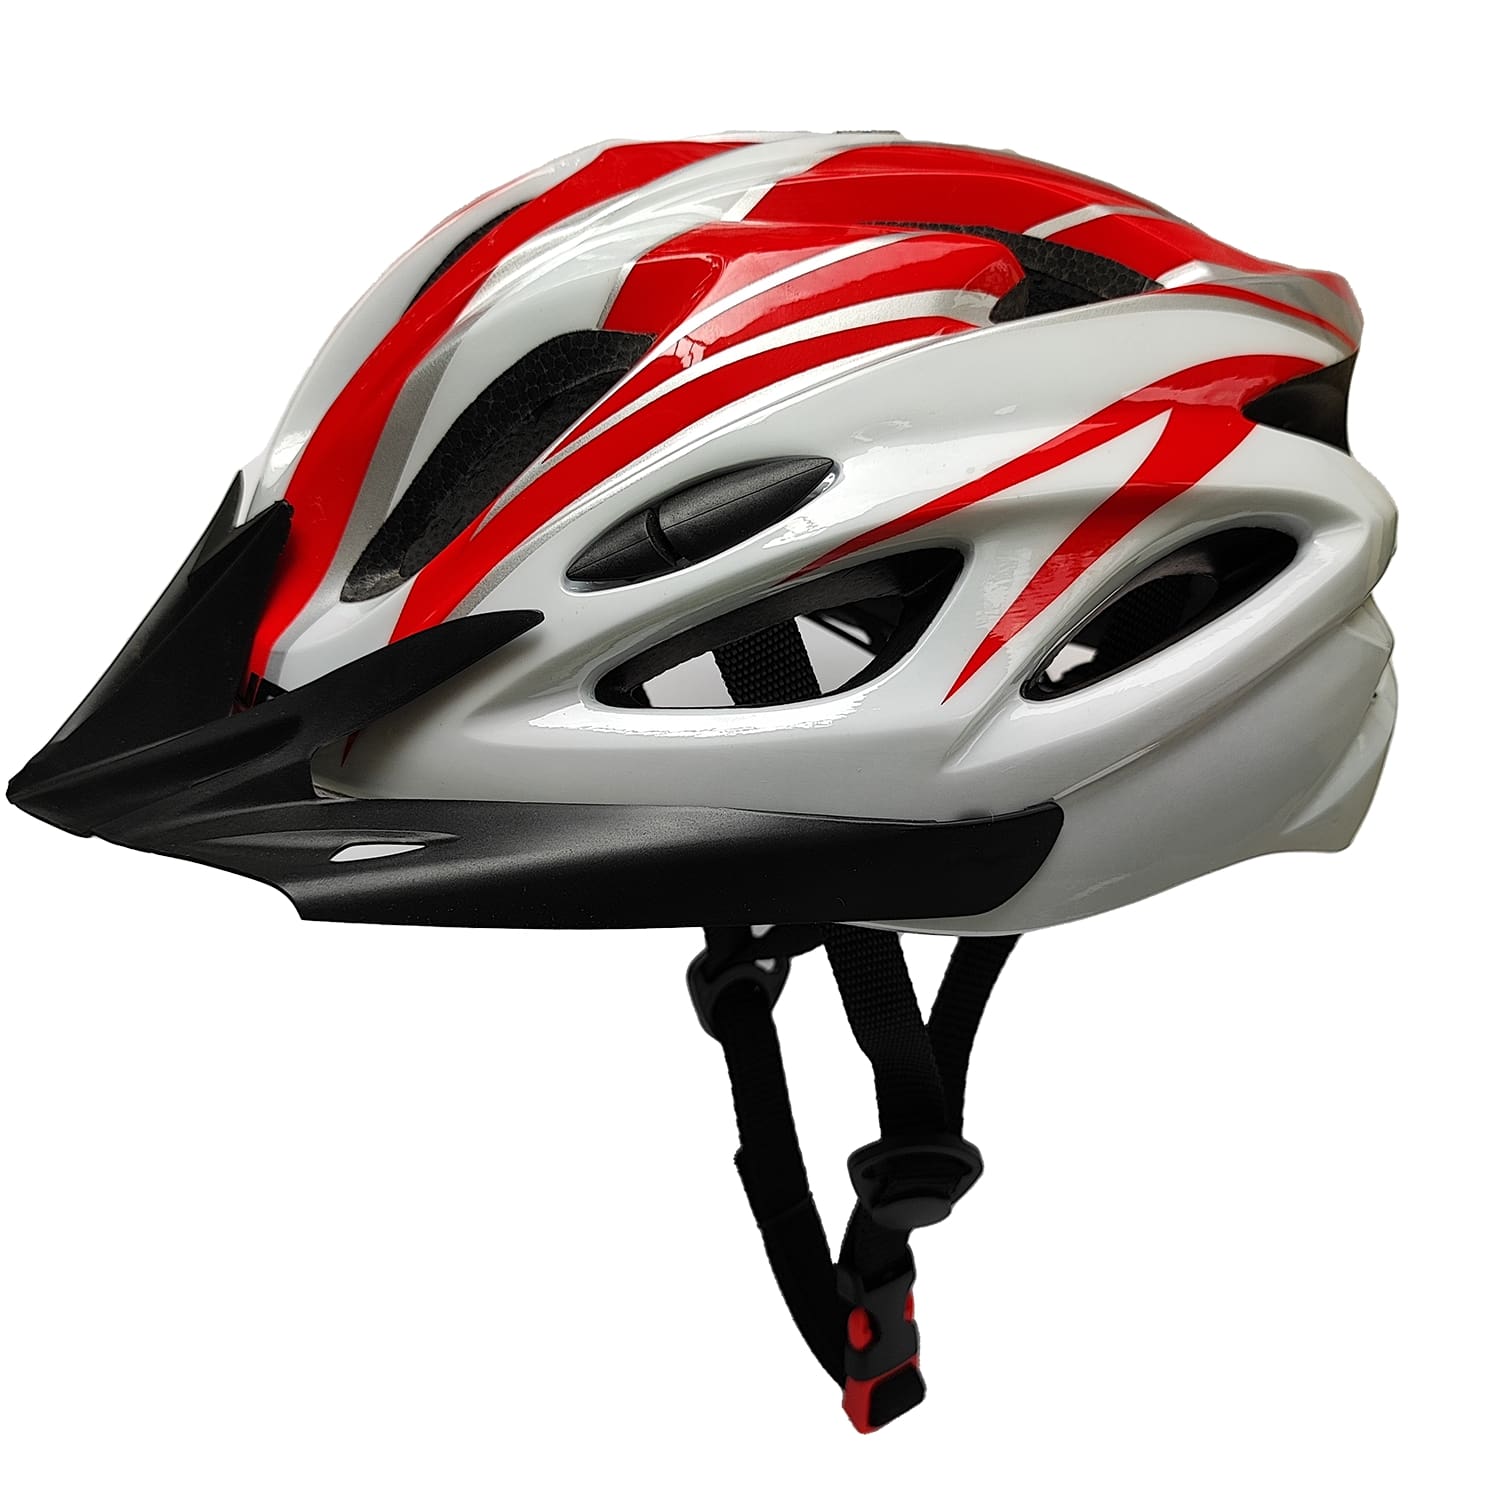 Shop Online Bicycle Helmet Safety Gear by omo bikes for hybrid or mtb cycle side vide